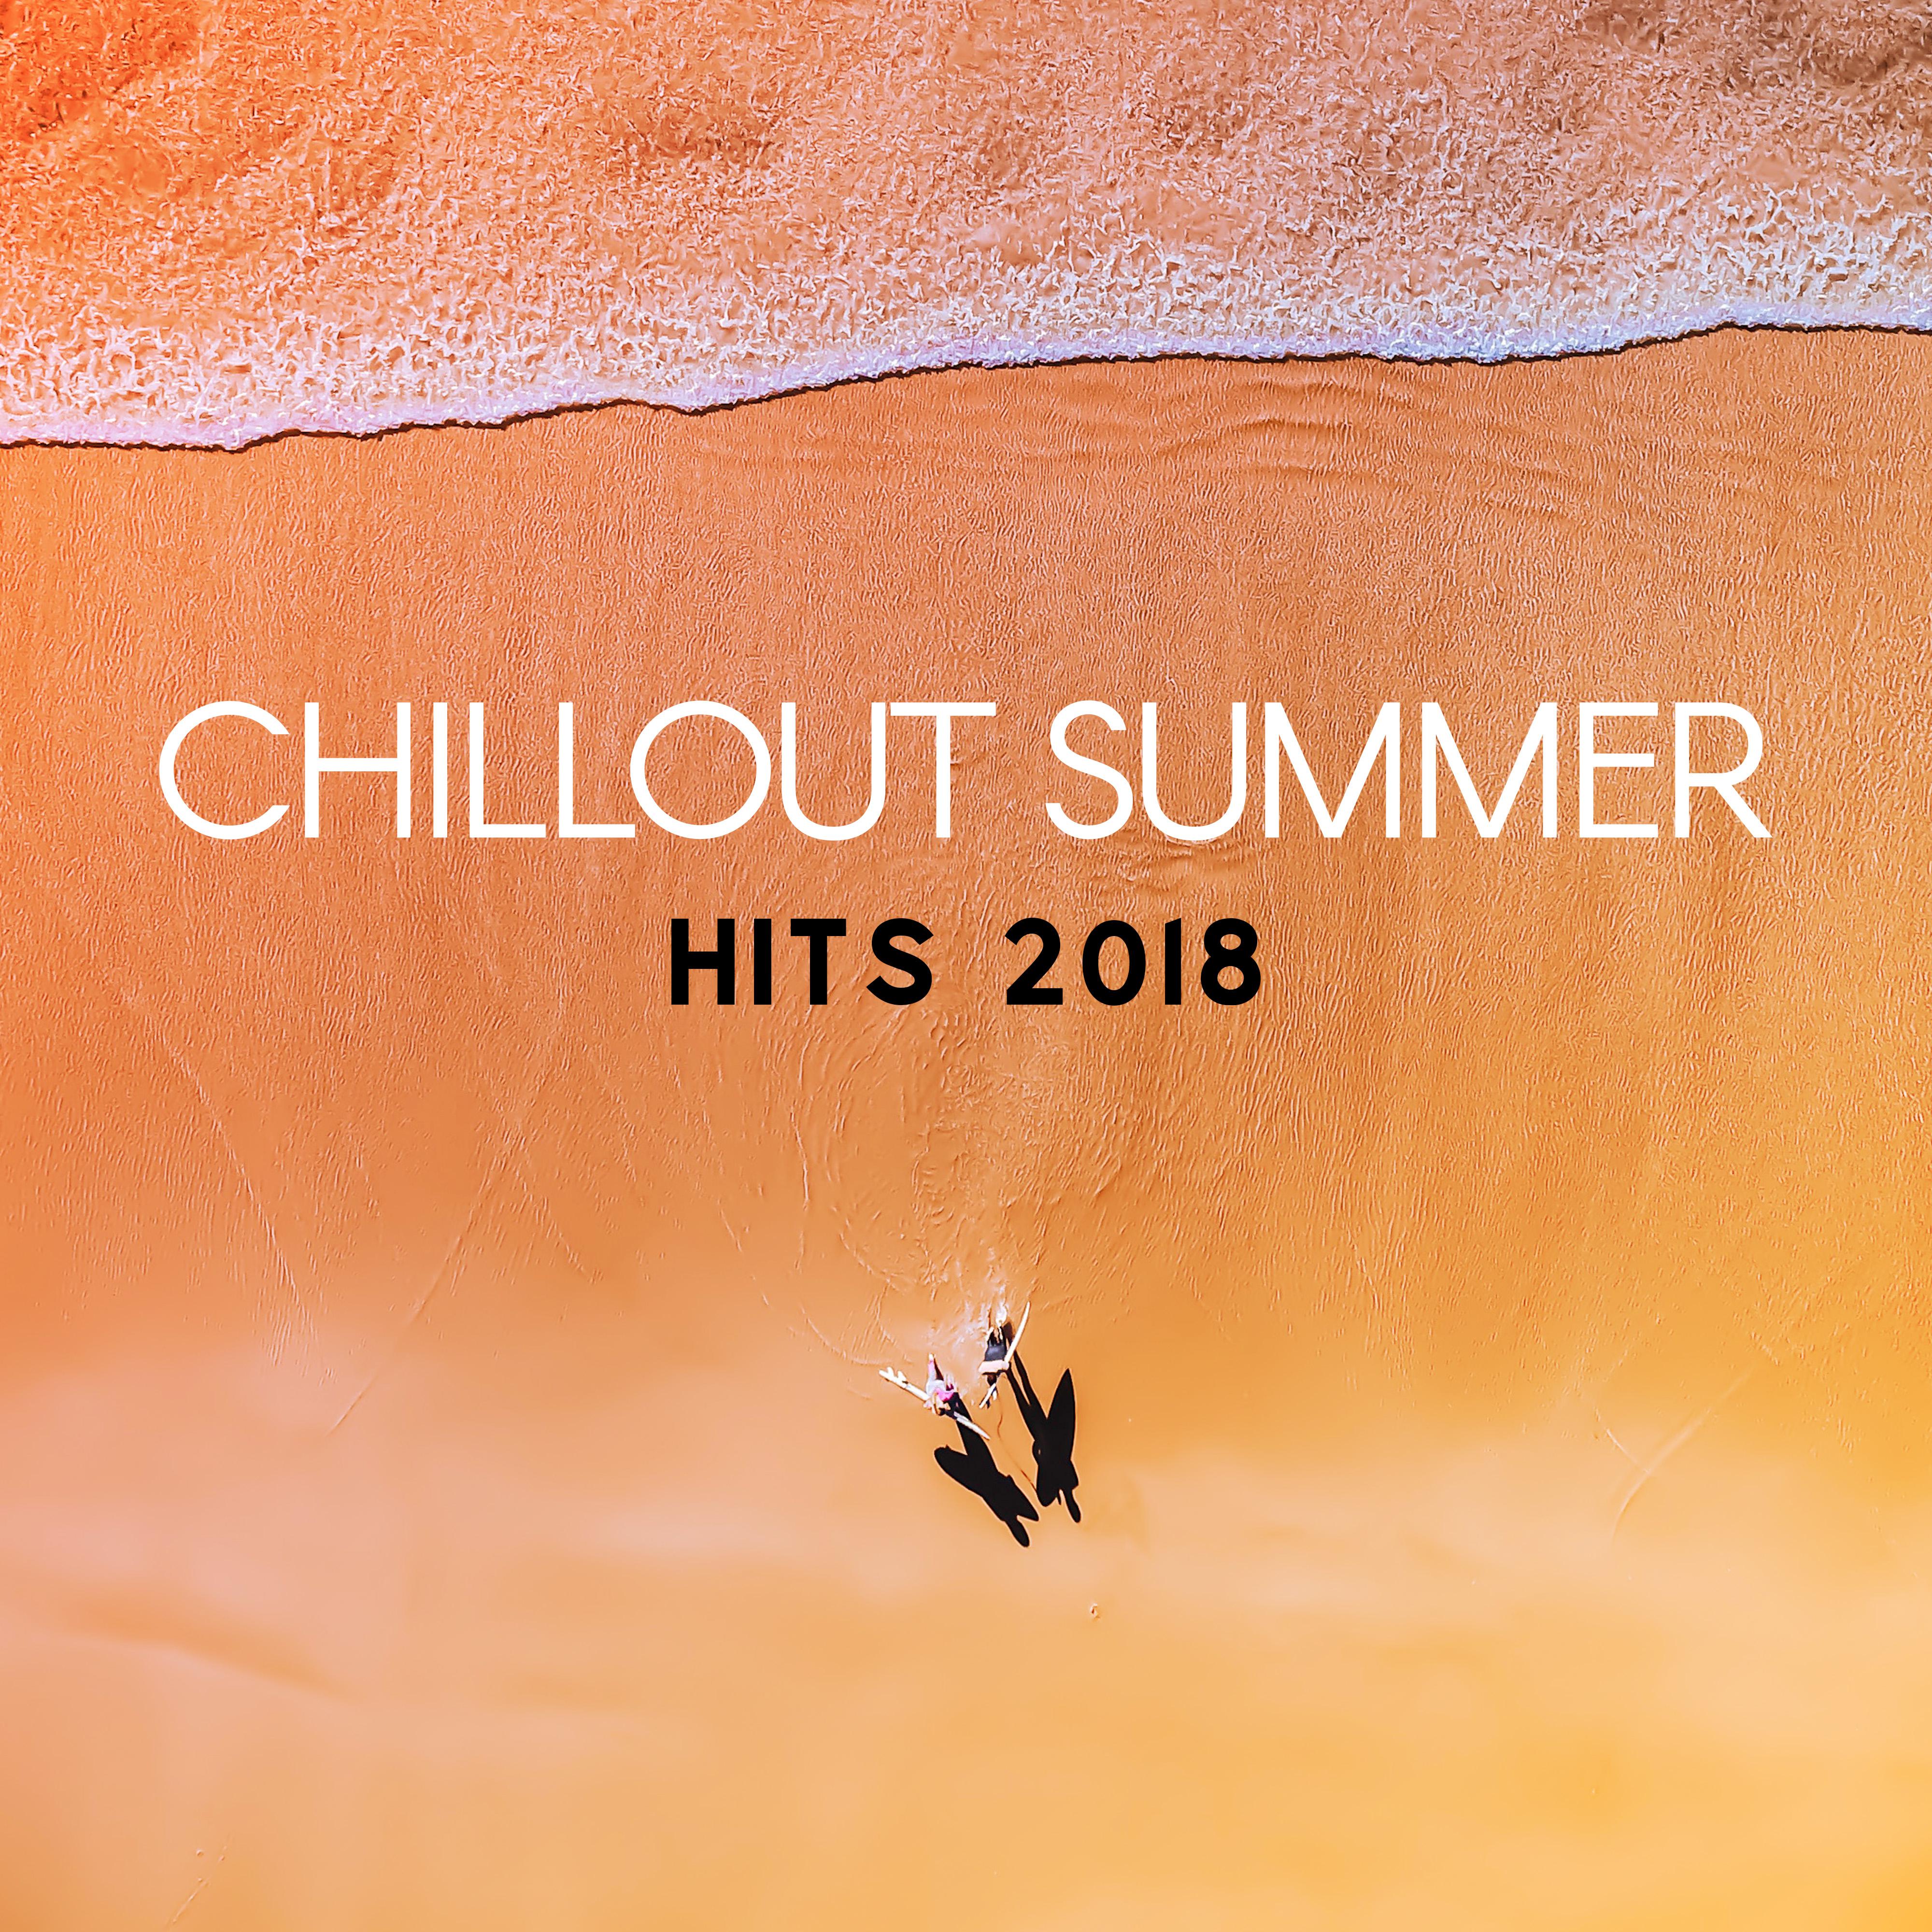 Chillout Summer Hits 2018